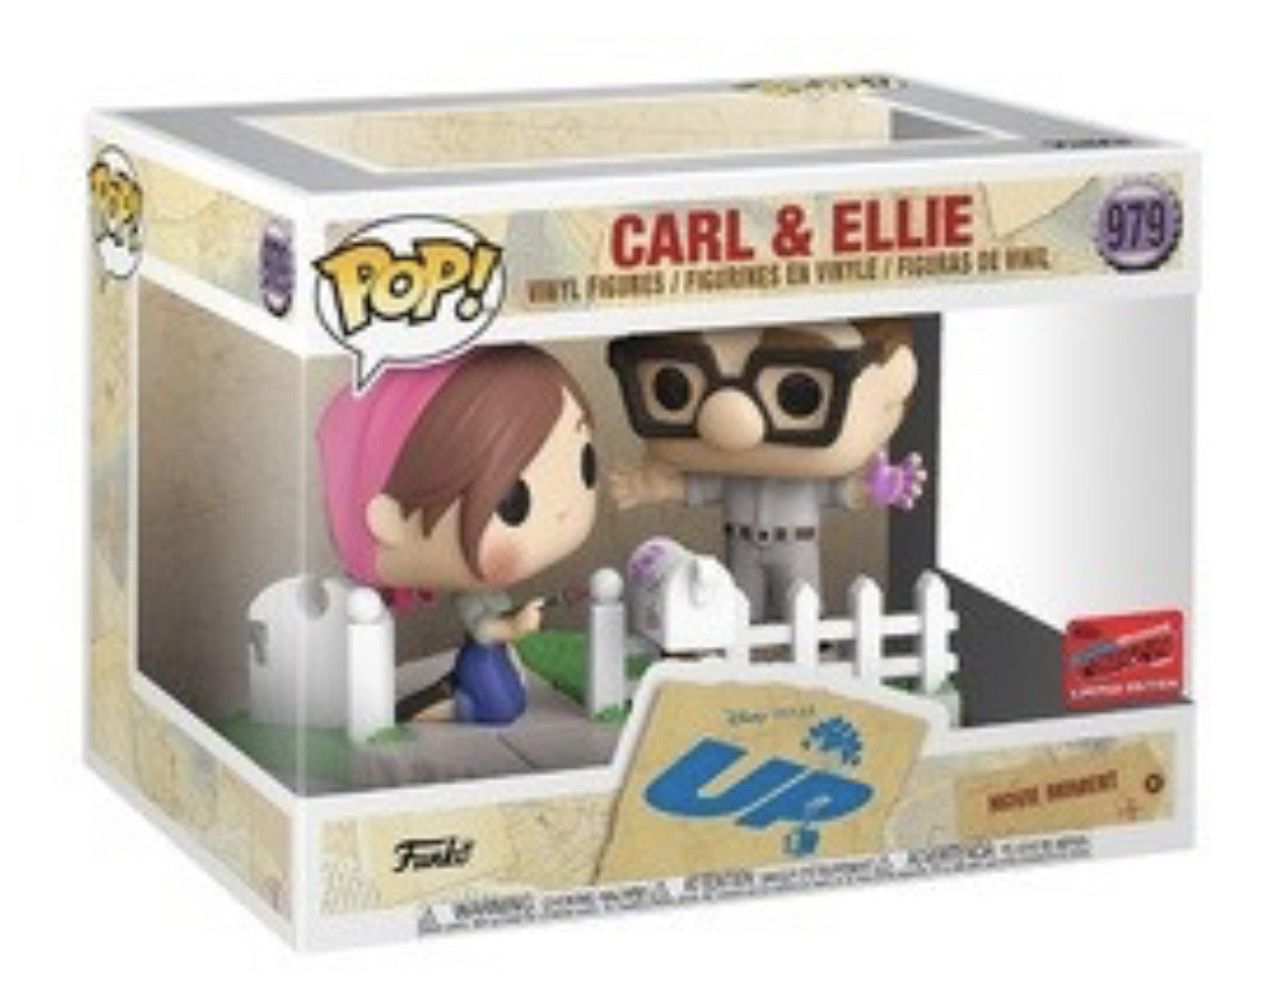 Funko Pop Disney Pixar’s UP Carl And Ellie 2020 NYCC Shared Sticker Confirmed